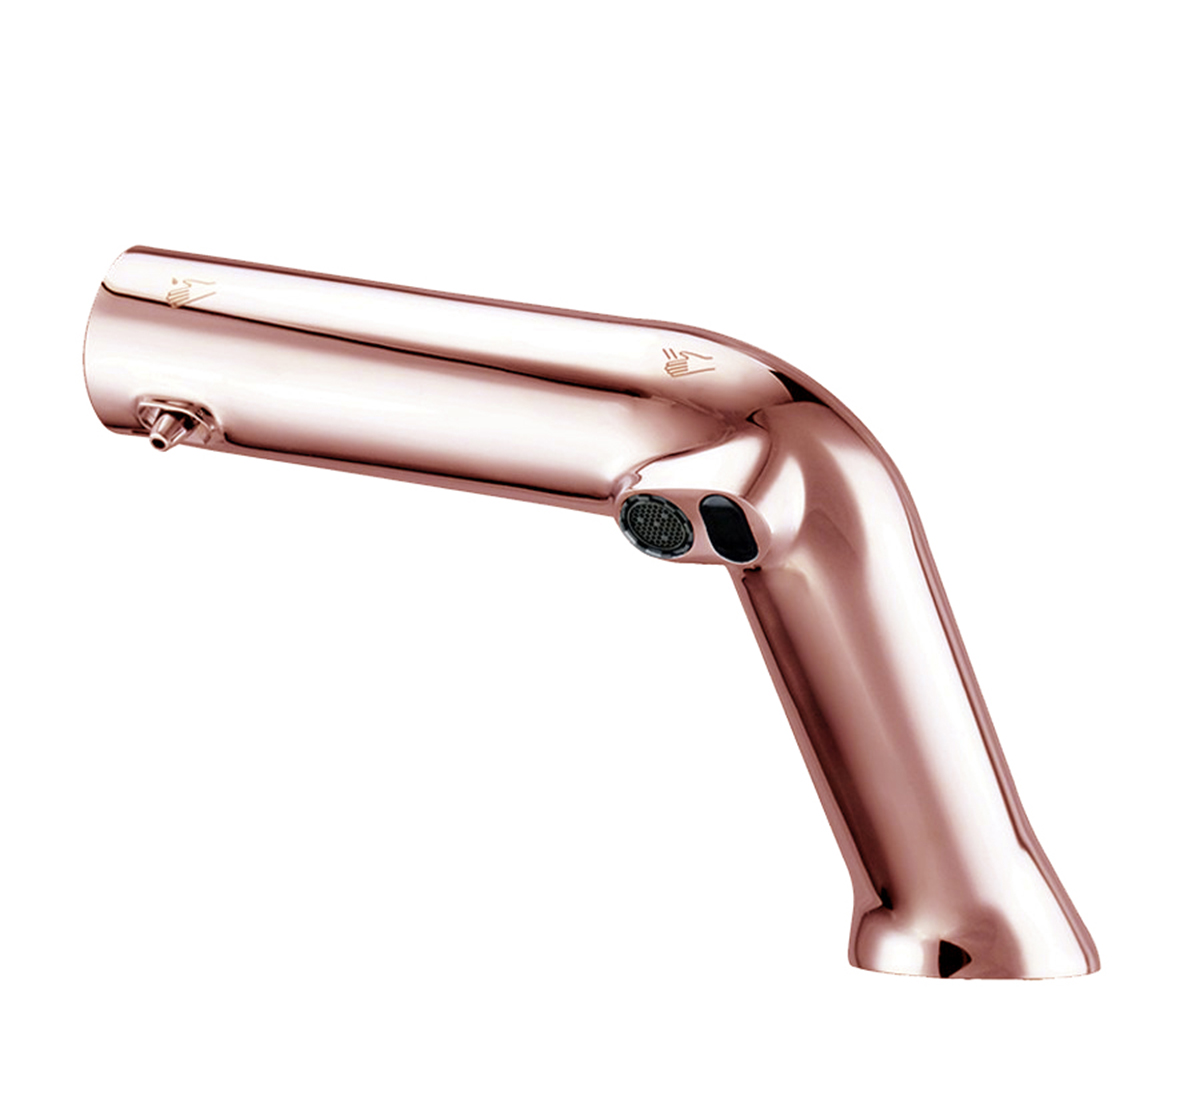 Rose Gold Pvd Coated Automatic Sensor Tap For Soap & Water

